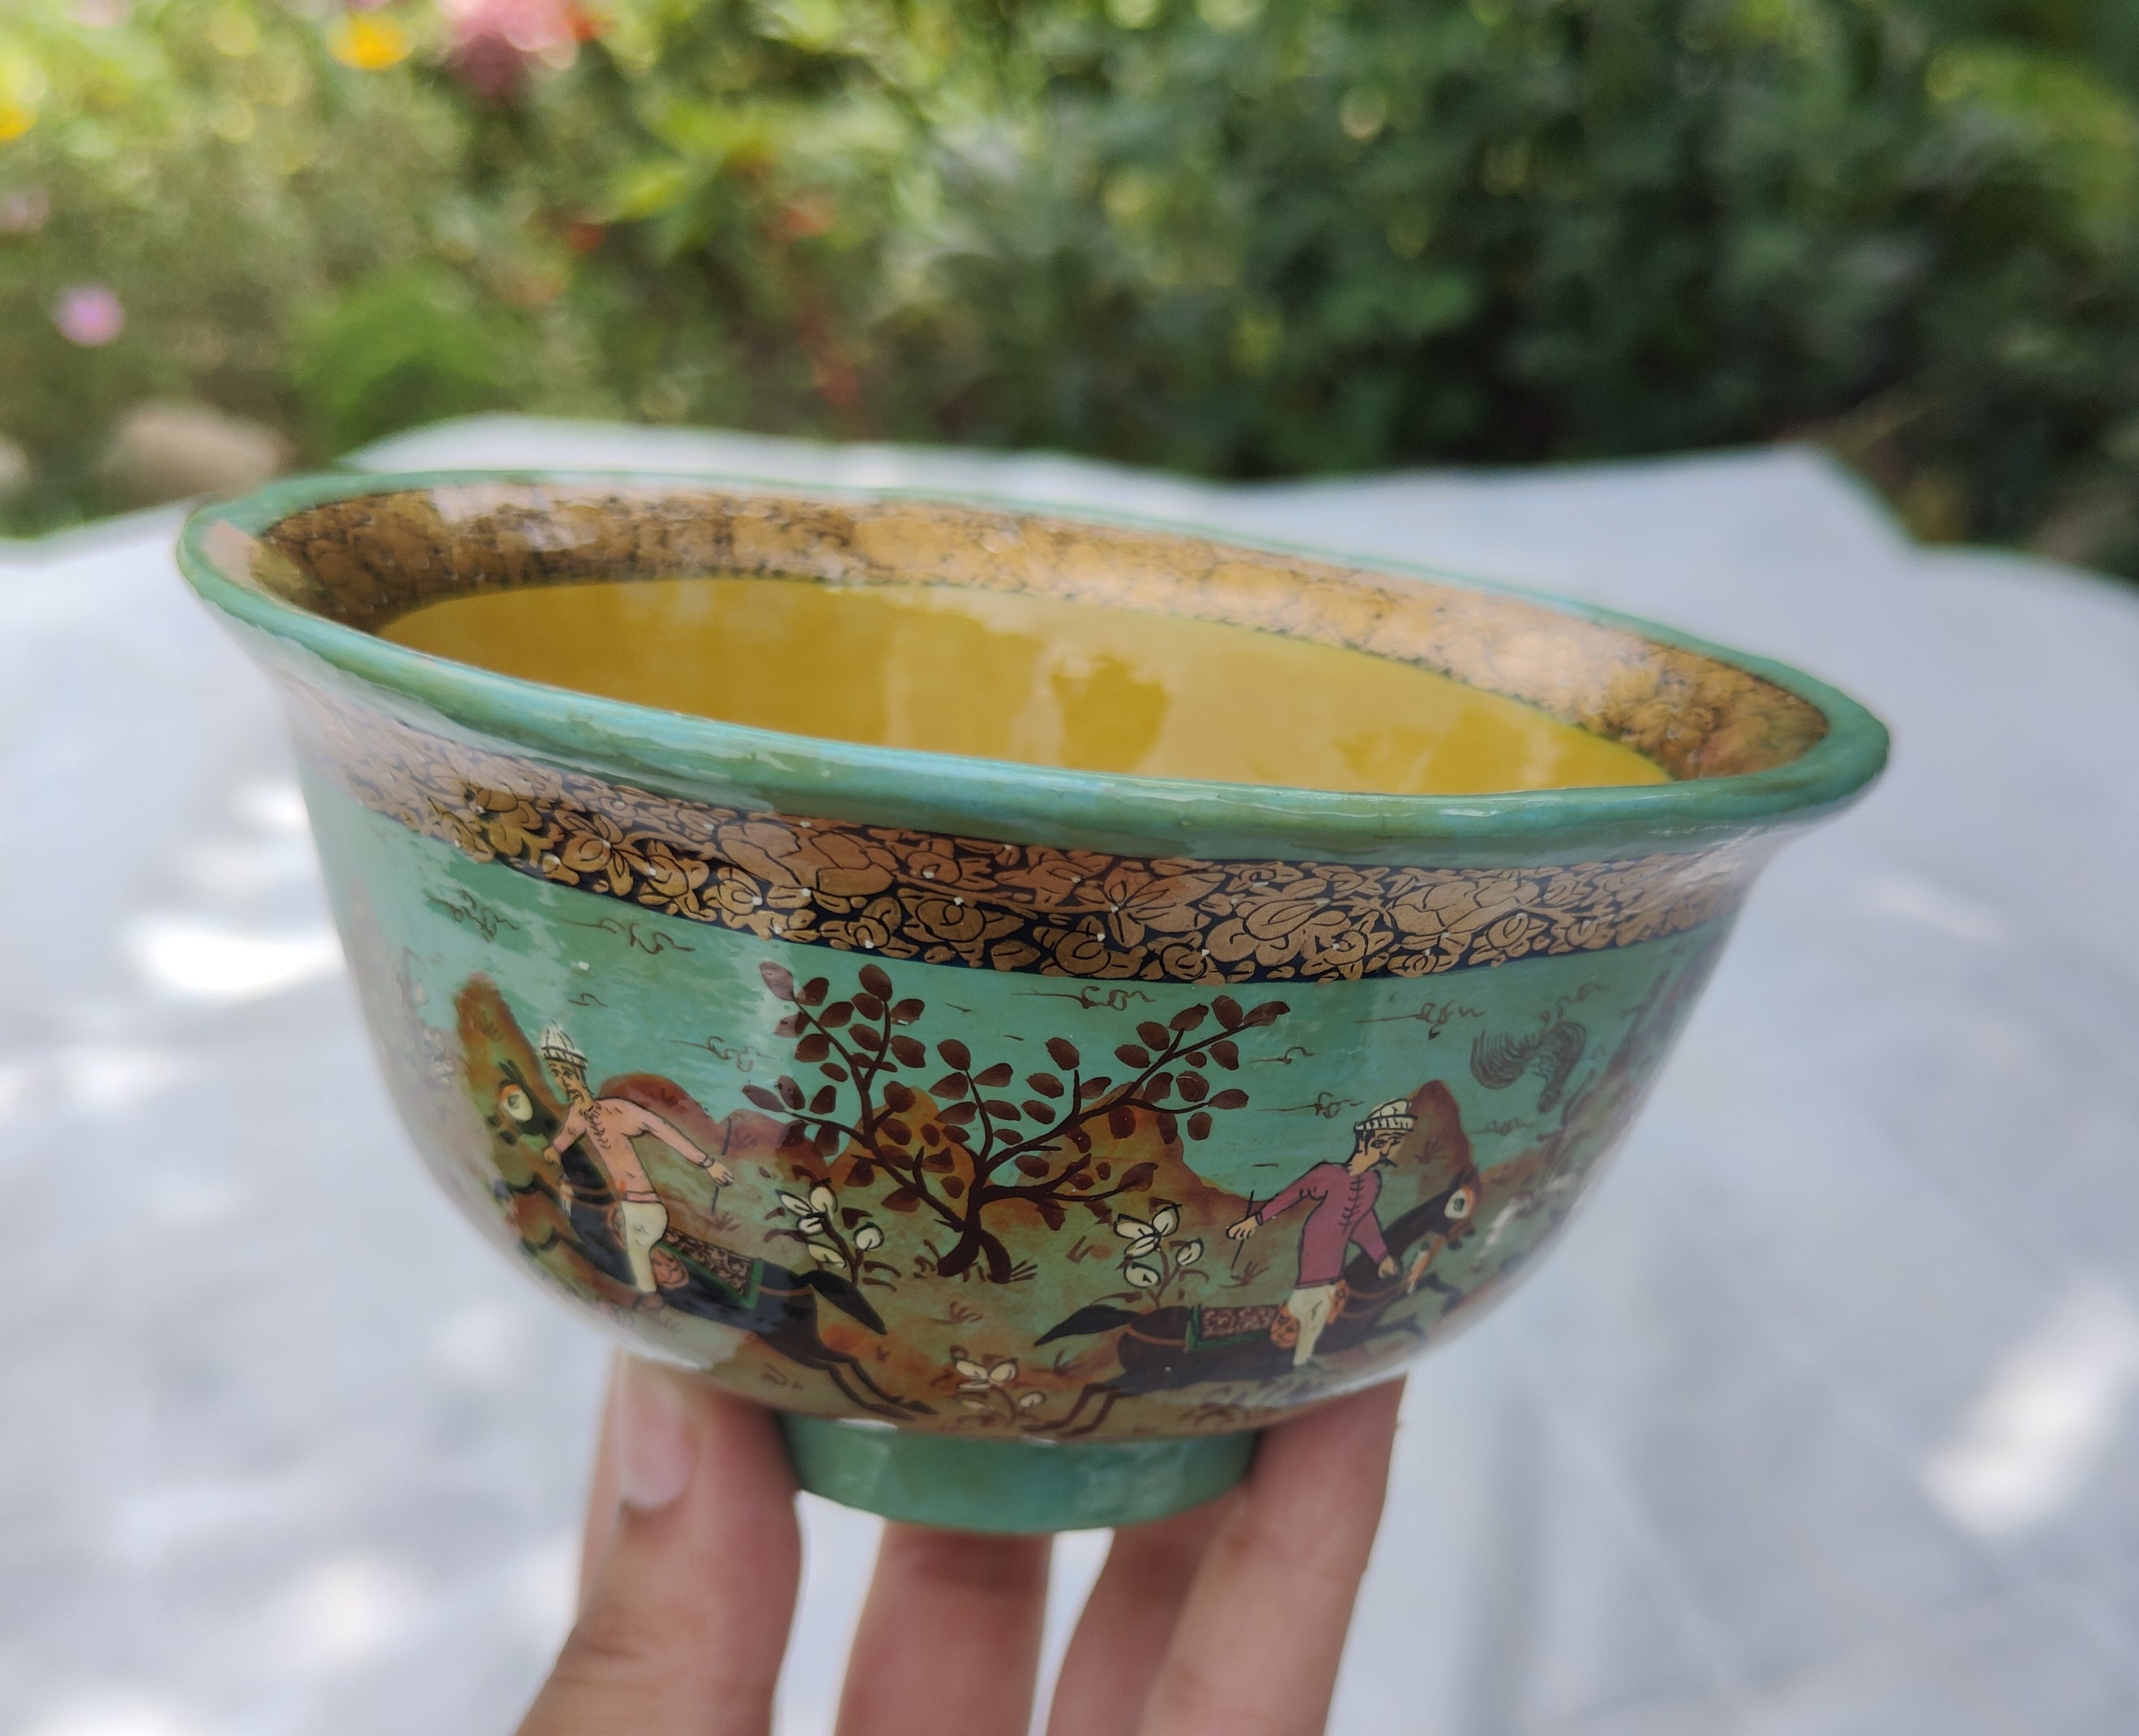 Sonth x Fayaz Ahmad Jan - Hunting in Turquoise Bowl